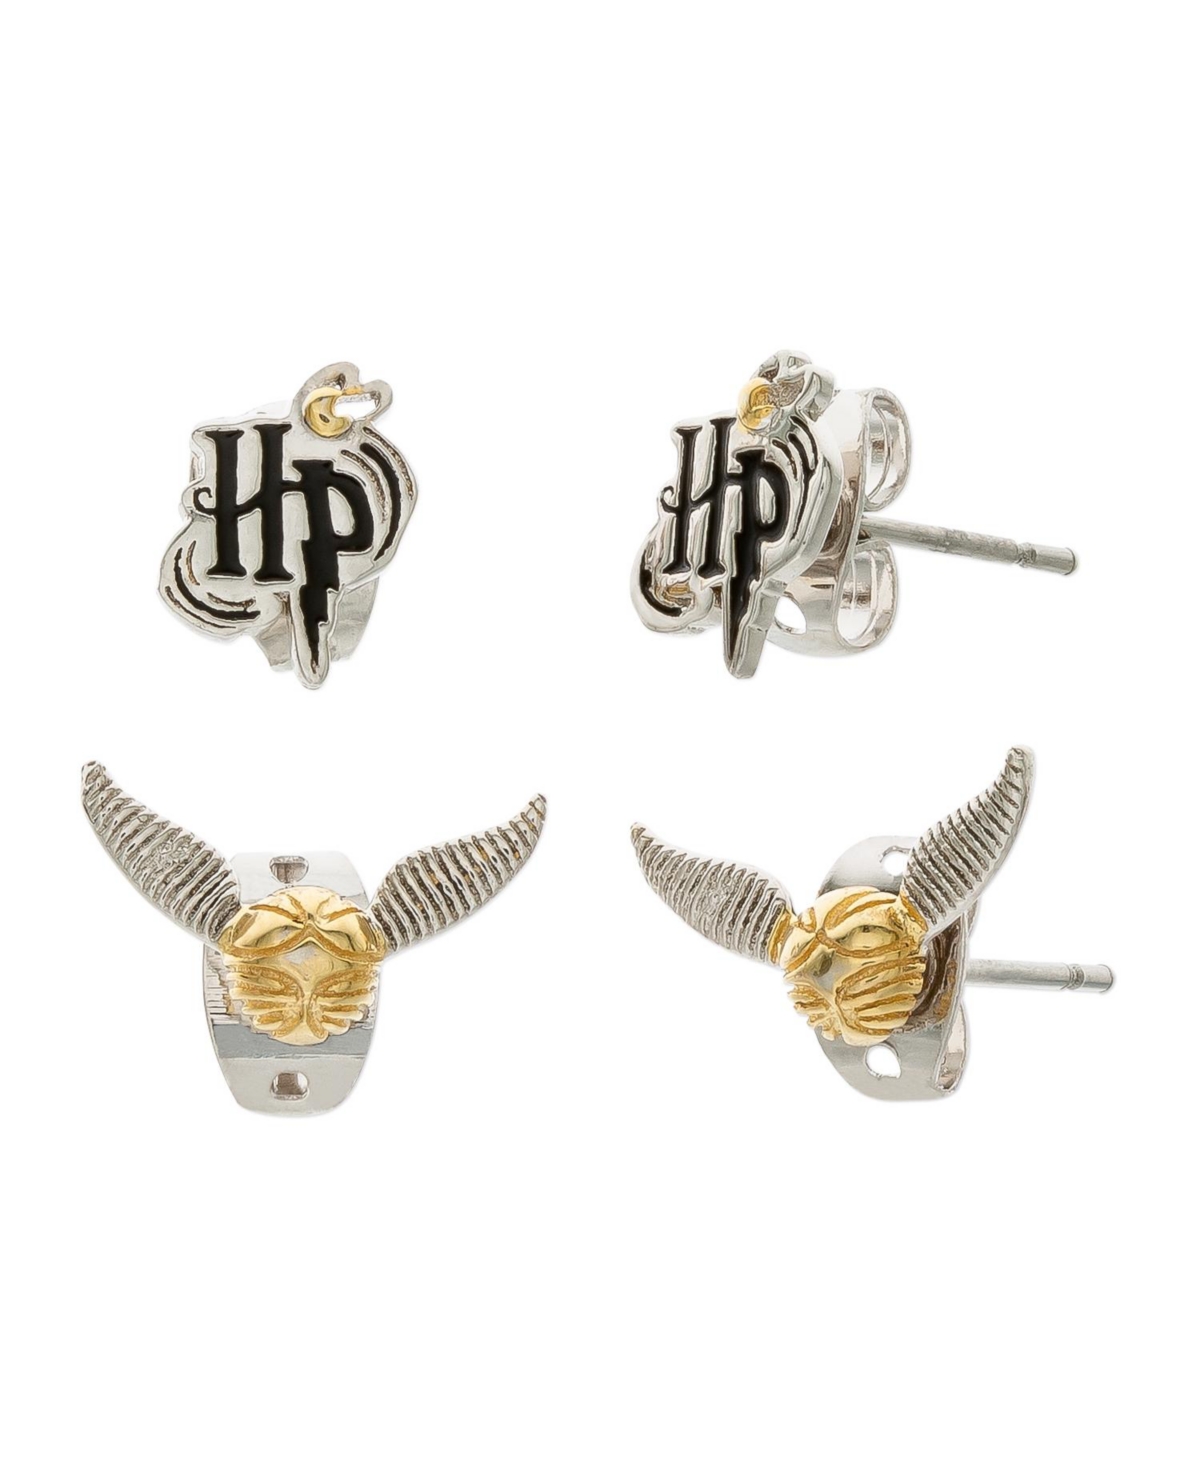 Gold and Silver Plated Stud Earrings Sets Hp and Golden Snitch- 2 Pairs - Silve, gold tone, black